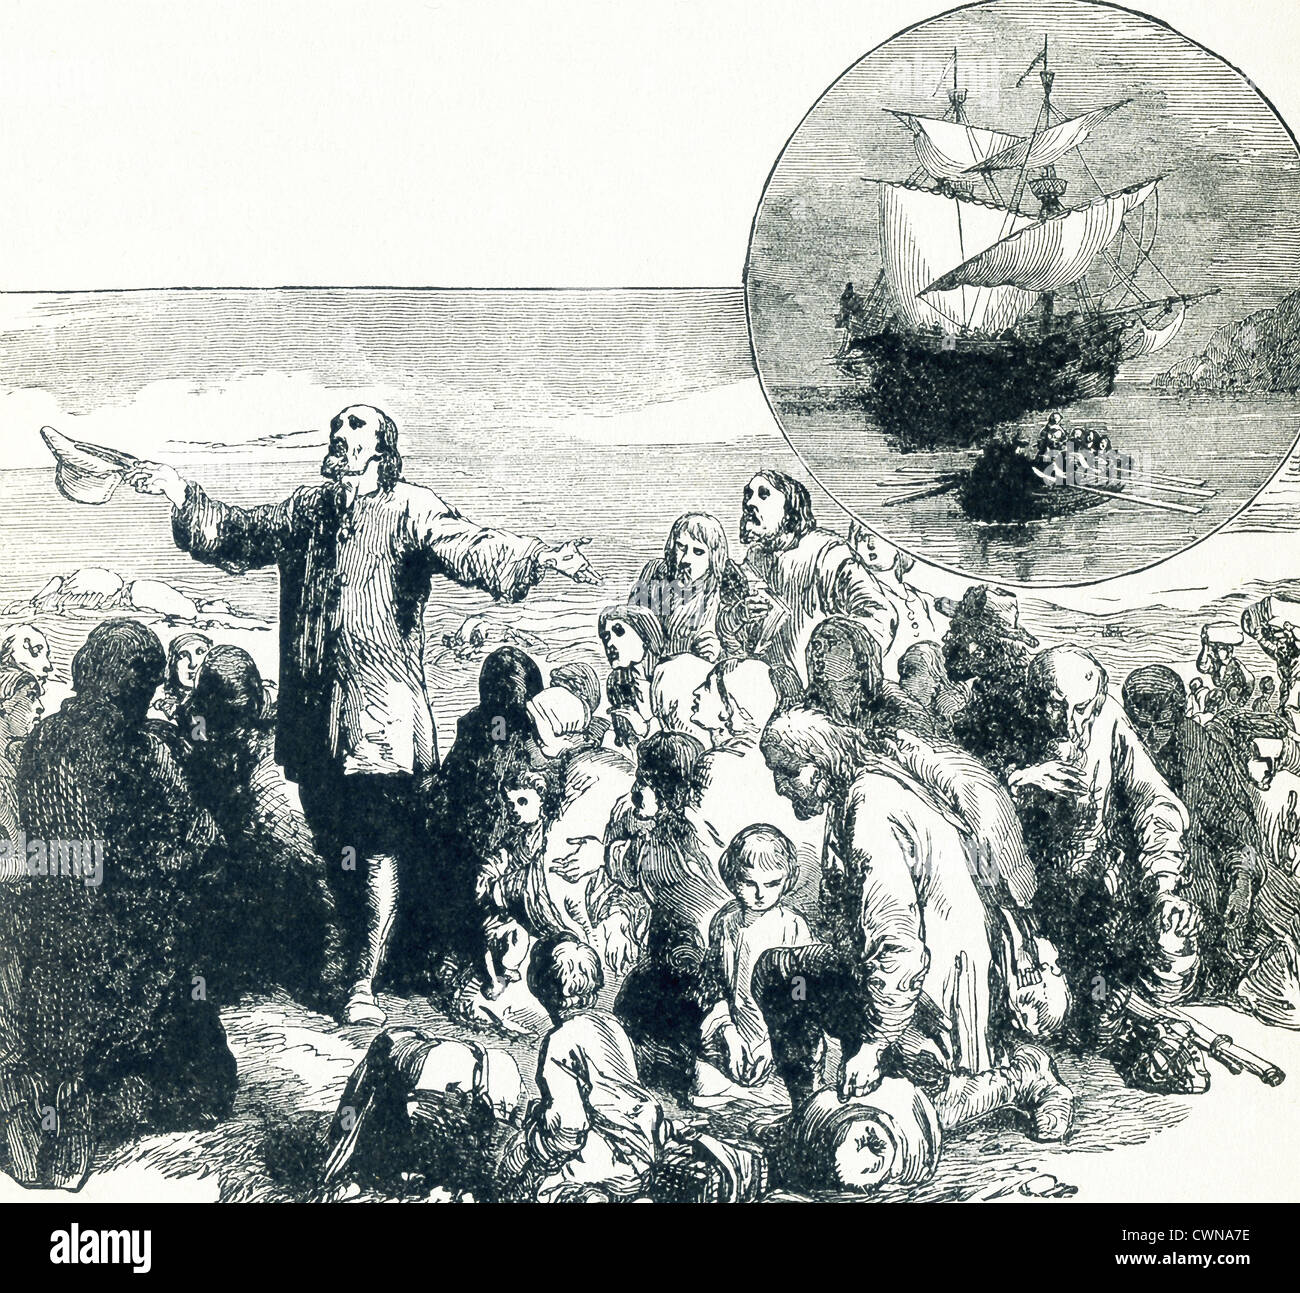 The Pilgrim Fathers land in Plymouth,and give thanks. In the inset circle is the ship on which they sailed— Mayflower. Stock Photo